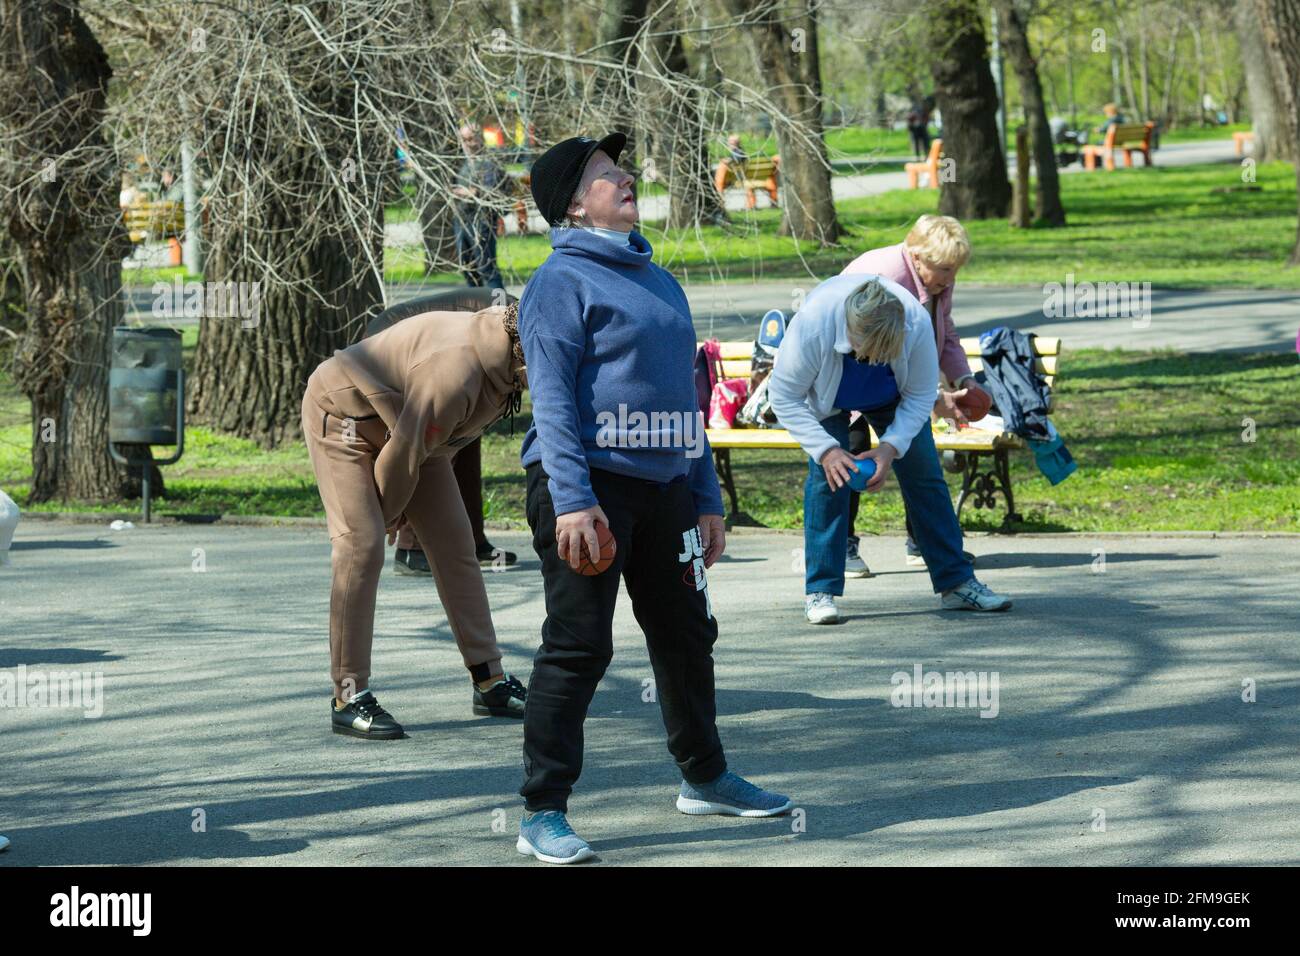 Dnepropetrovsk, Ukraine - 04.22.2021: A group of elderly people doing health and fitness gymnastics in the park. Old people do exercises with a ball. Stock Photo